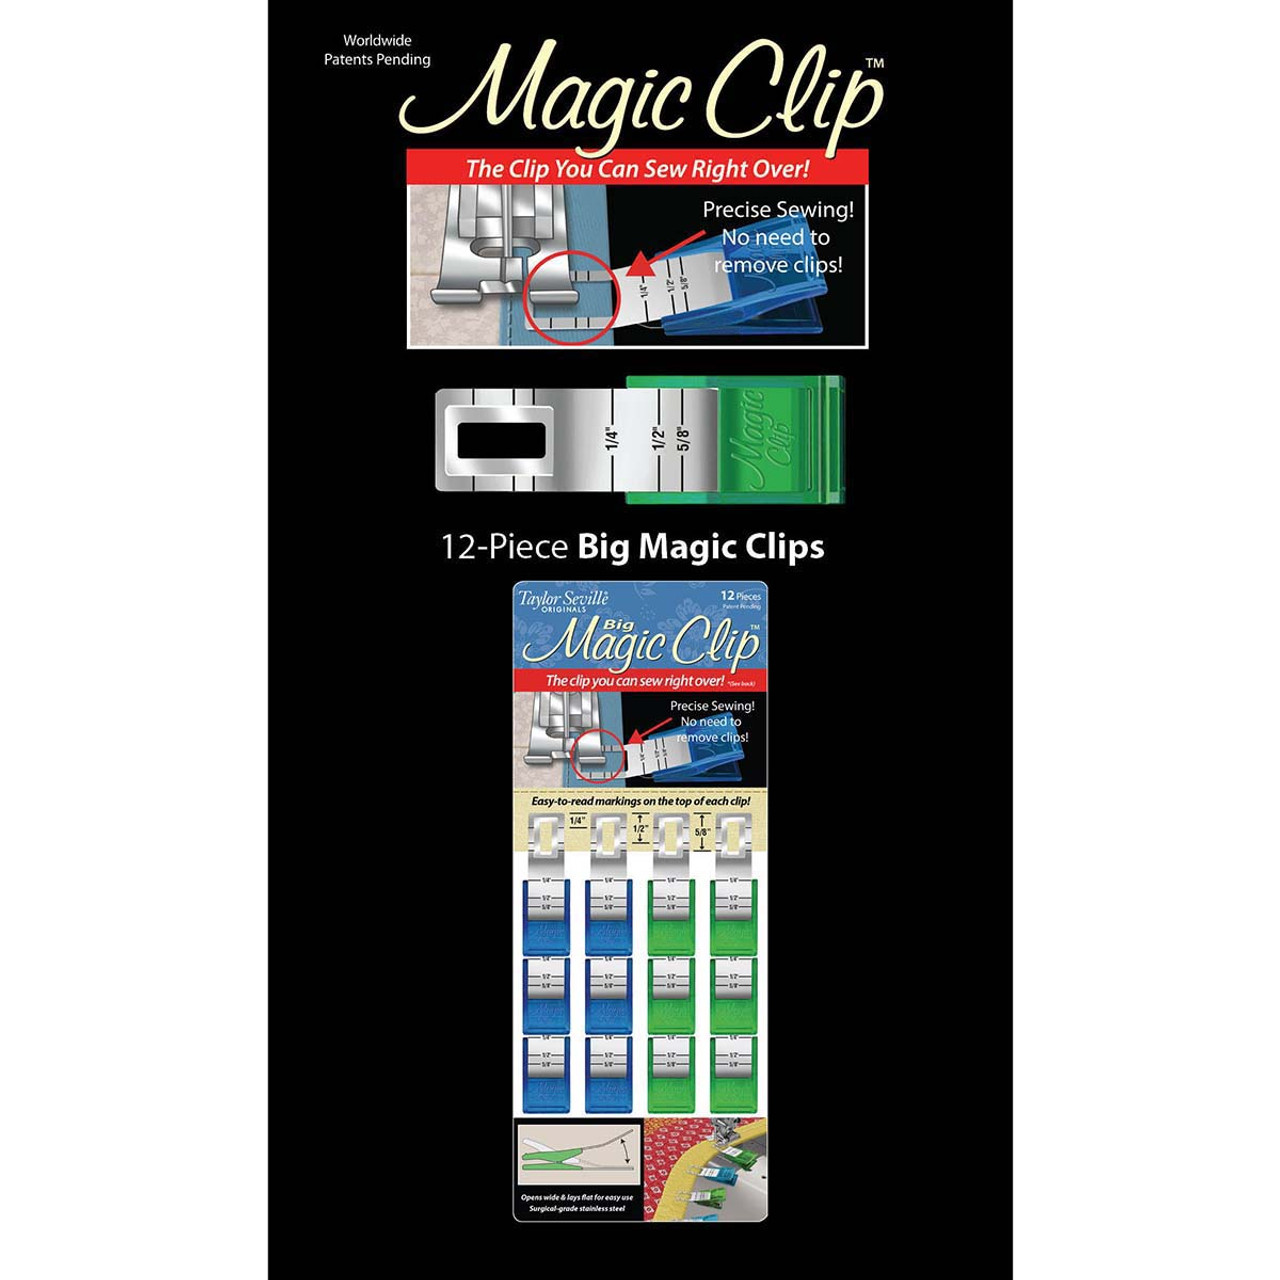 Taylor Seville Originals Small Magic Clip Sewing Clips - Package of 12 NEW!